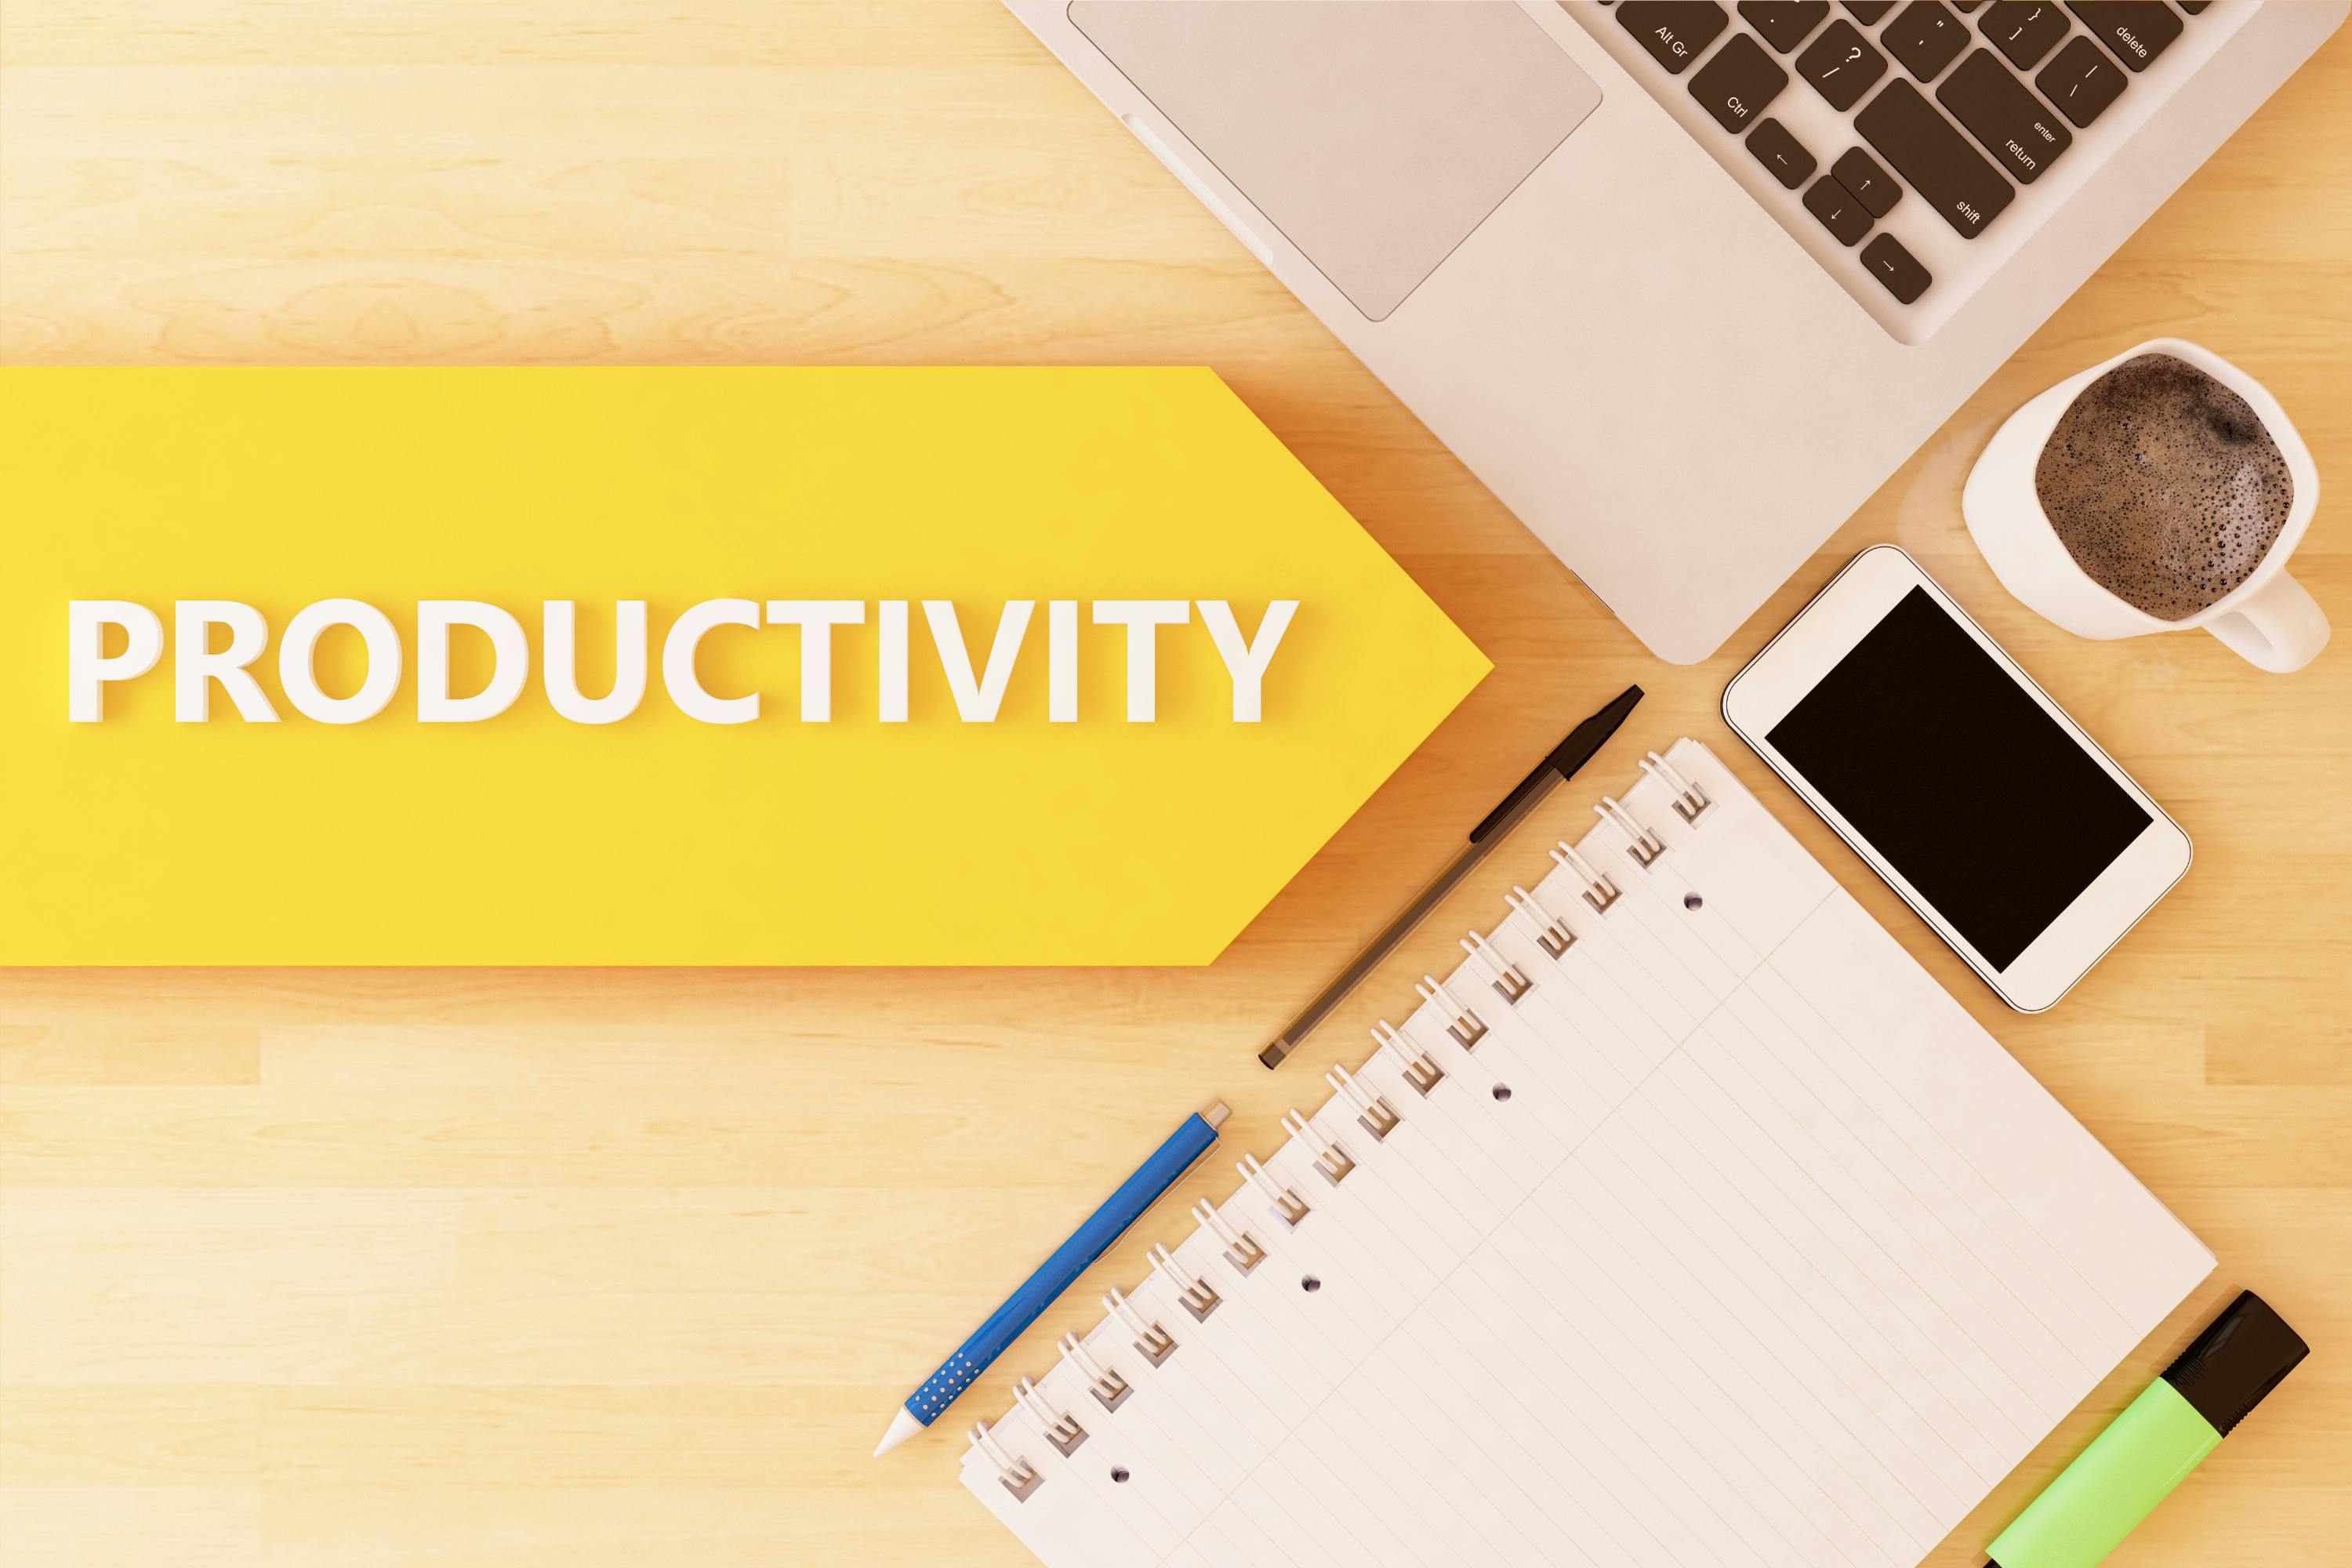 How to Improve productivity in the workplace